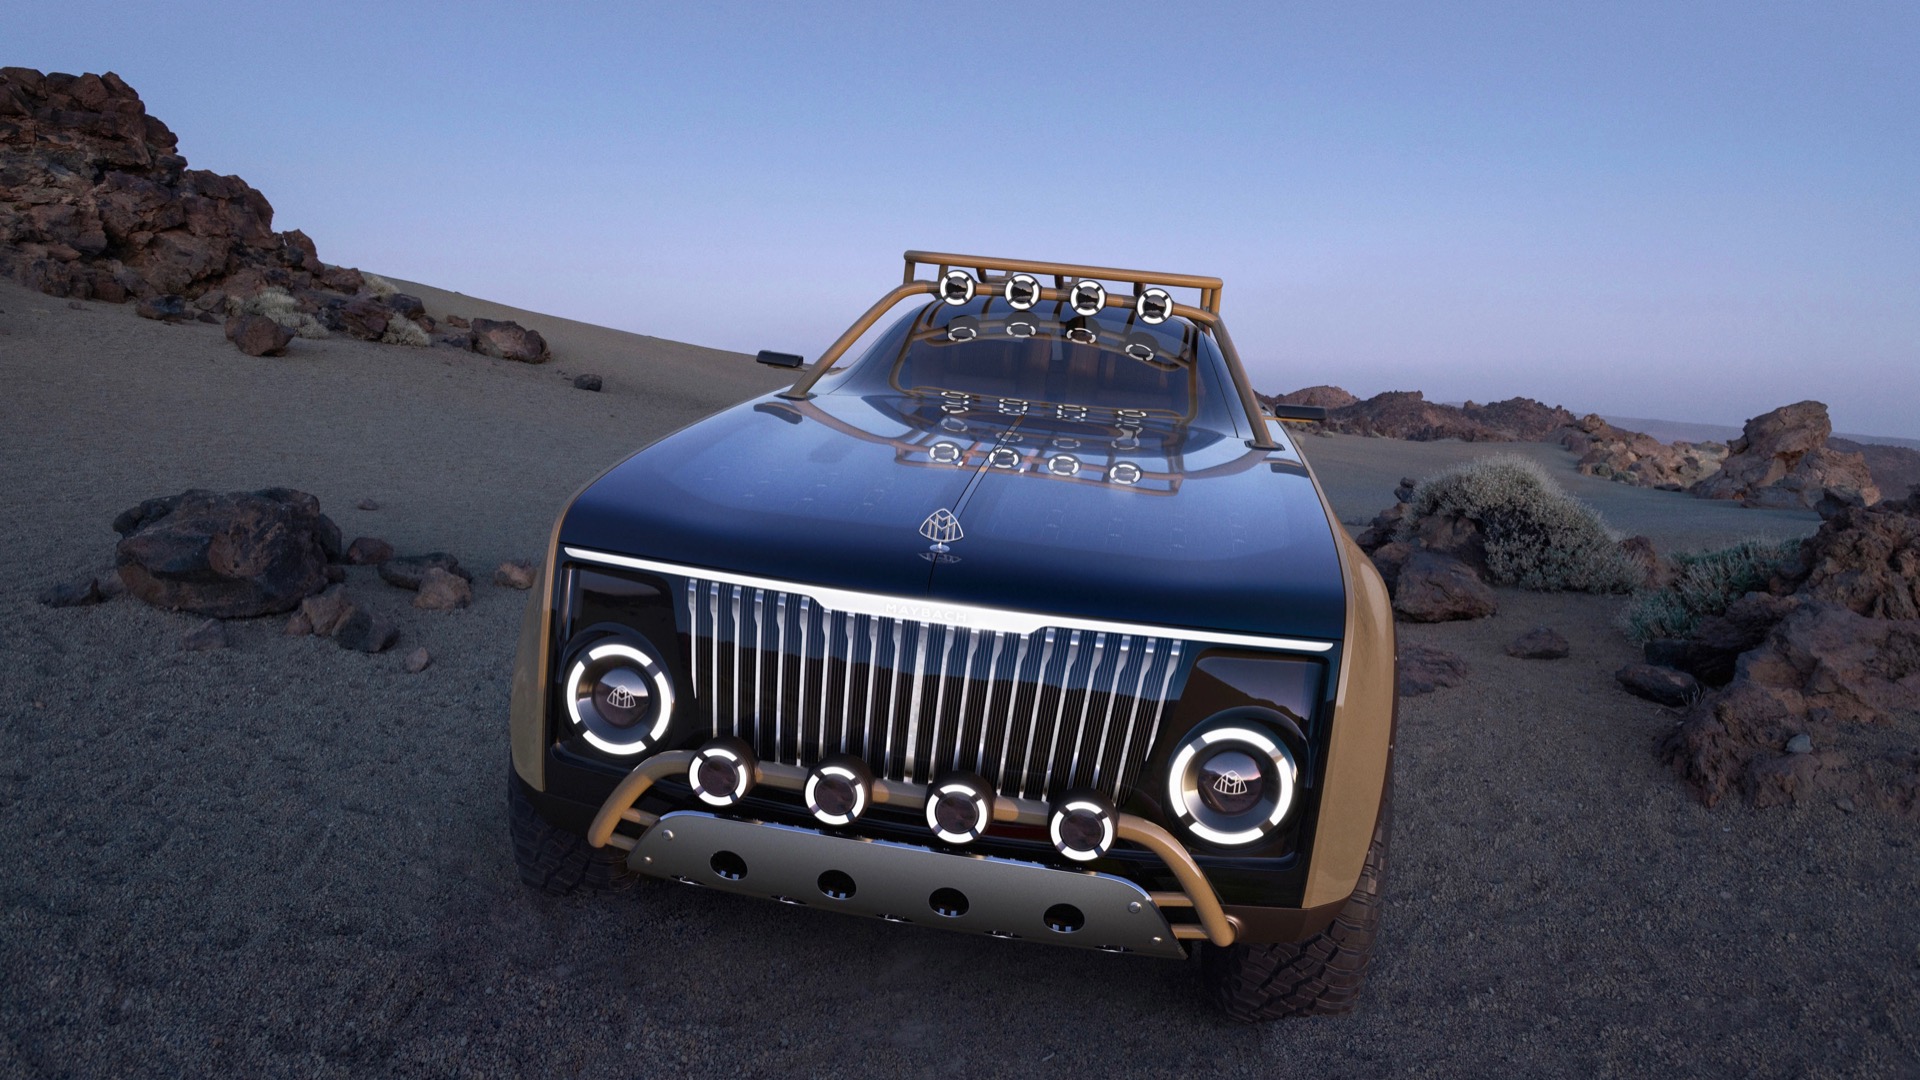 Mercedes goes Mad Max lux with Project Maybach off-road EV coupe conceptMercedes goes Mad Max lux with Project Maybach off-road EV coupe concept